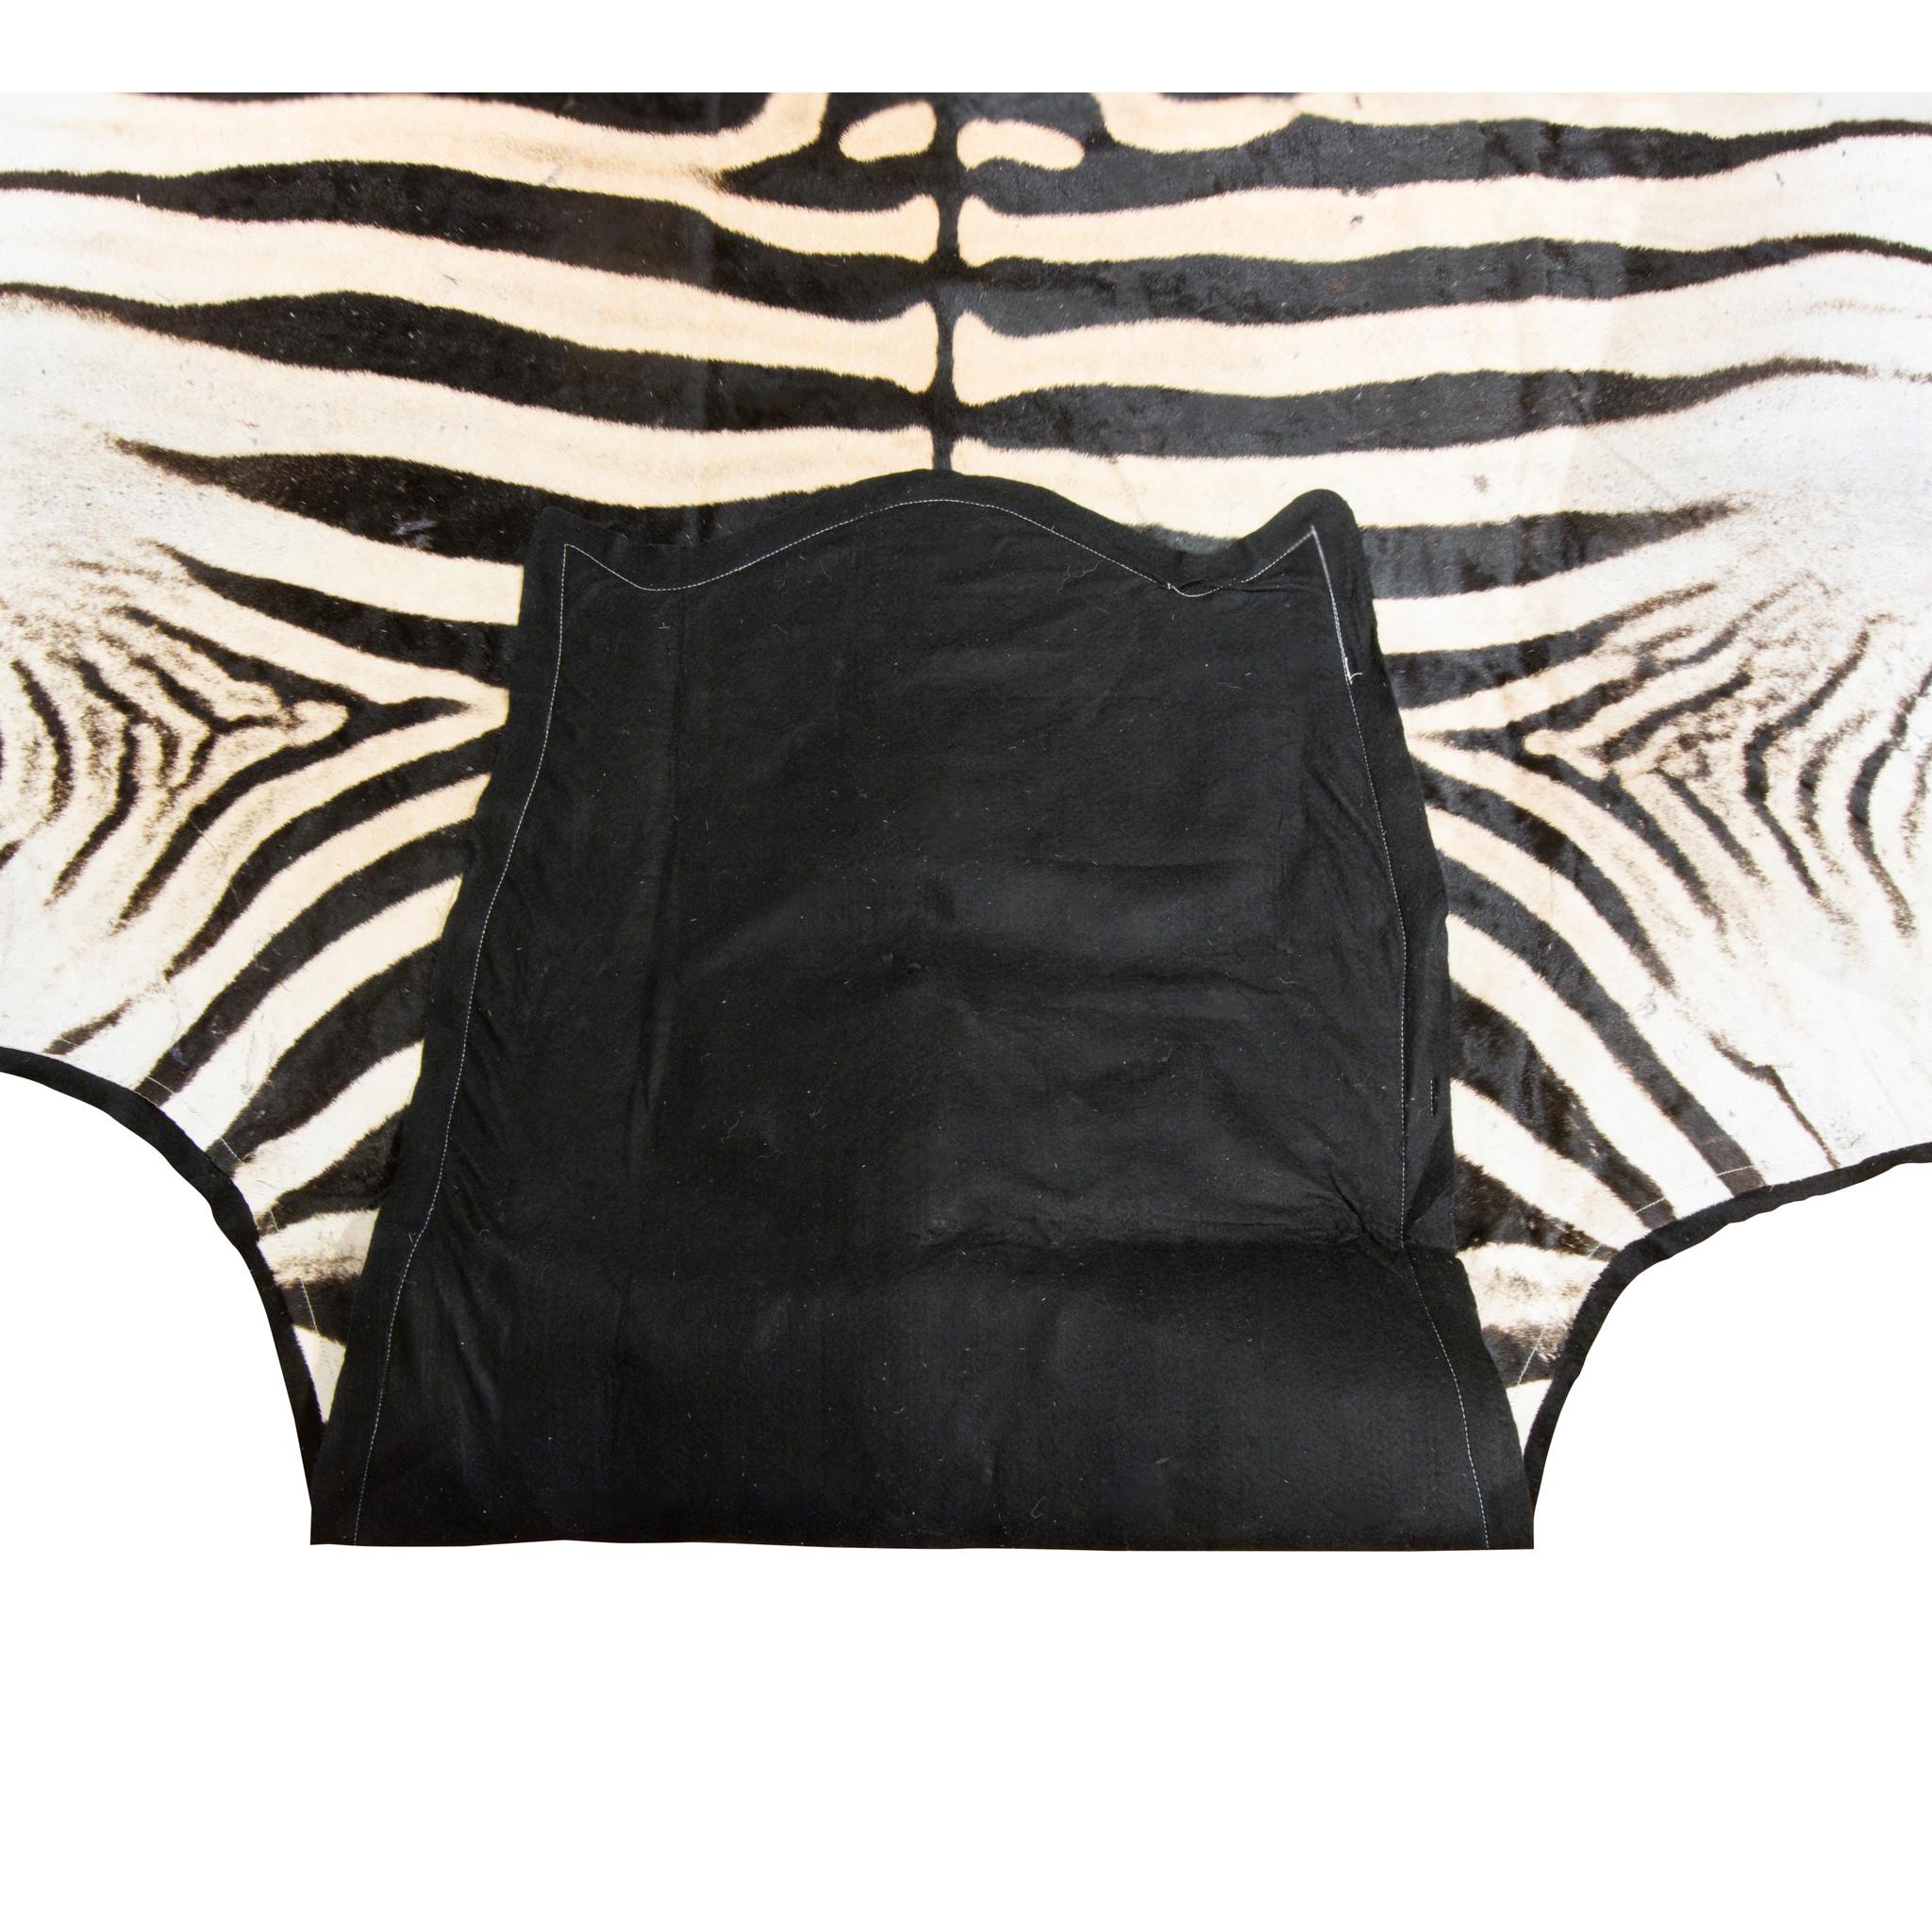 A top-quality African Zebra Burchell hide that originates from South Africa. We hand select our Zebra hides so that you receive only top-quality, A graded Zebra hides. Each hide has been tanned at one of South African leading tanneries to a soft and